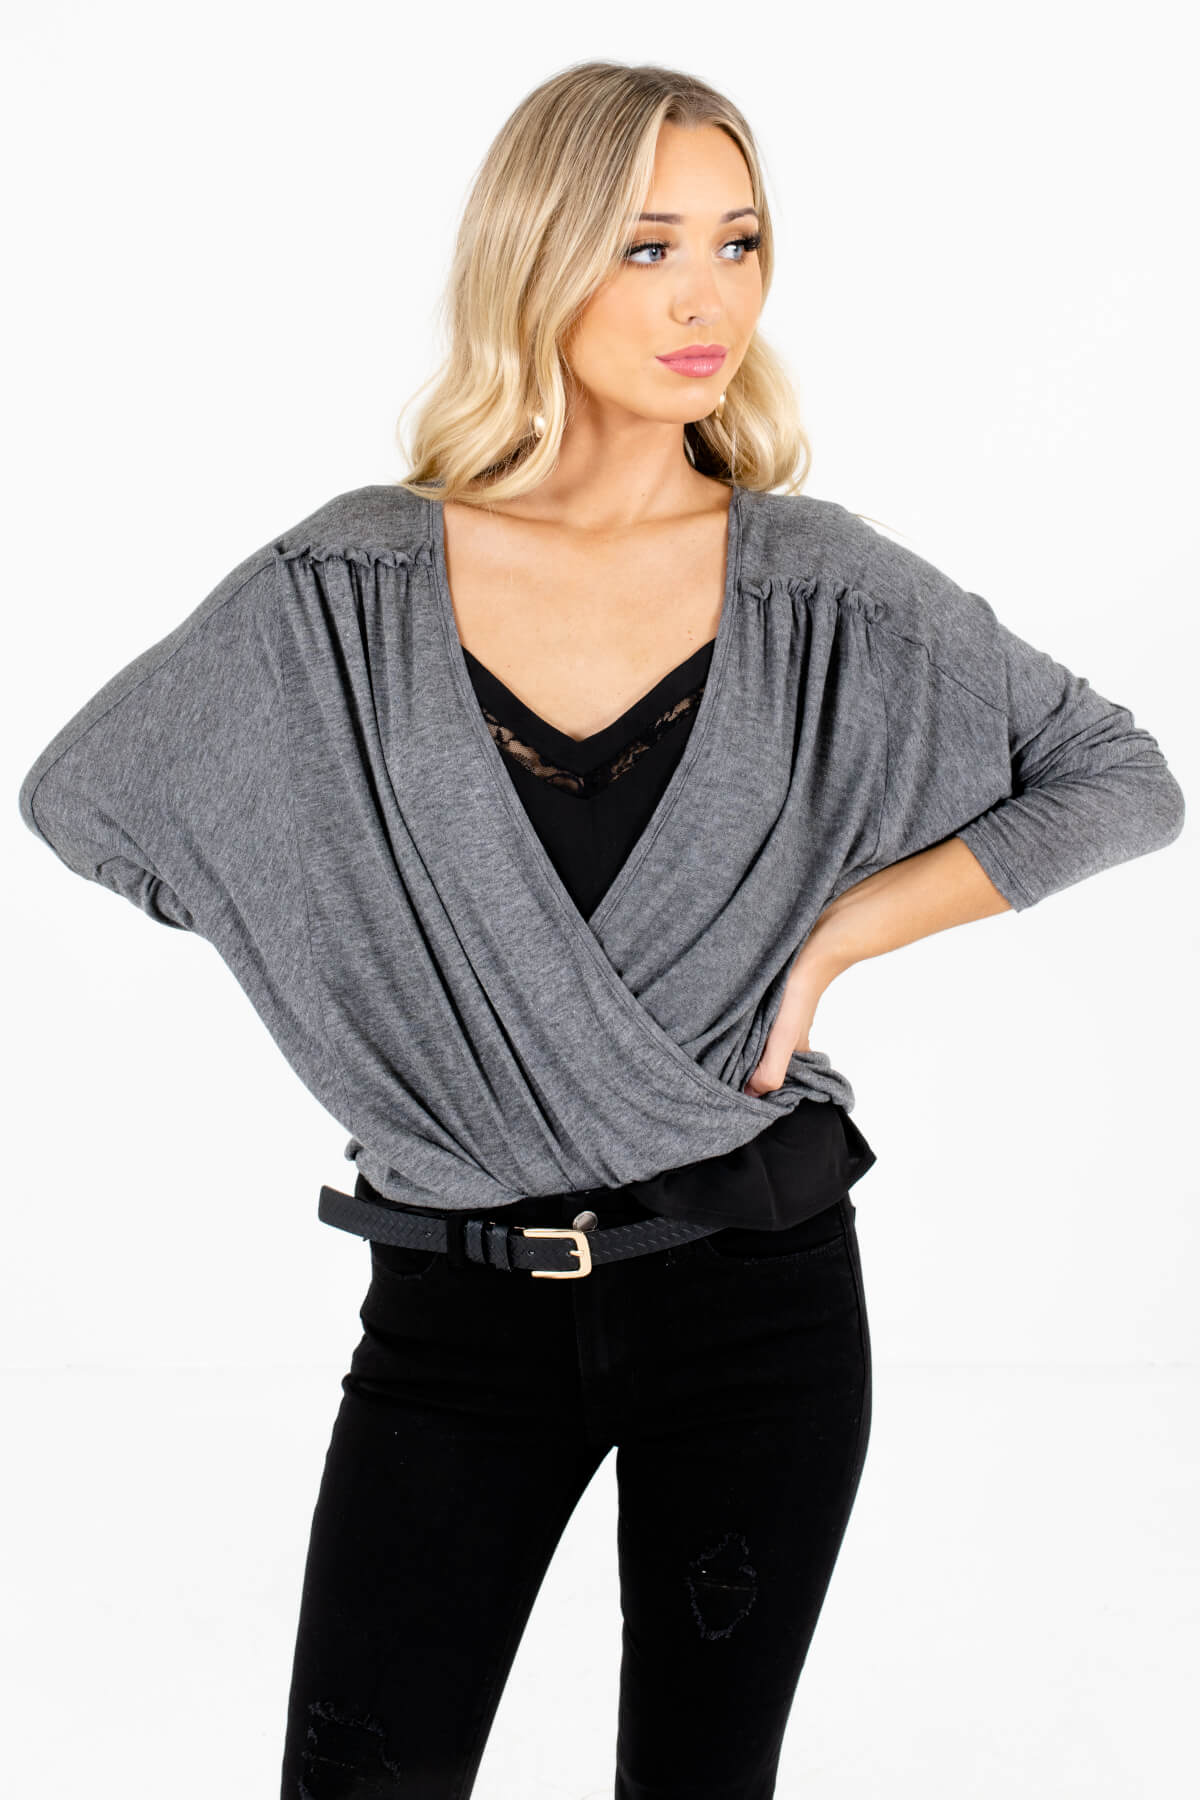 Heather Gray Cute and Comfortable Boutique Tops for Women